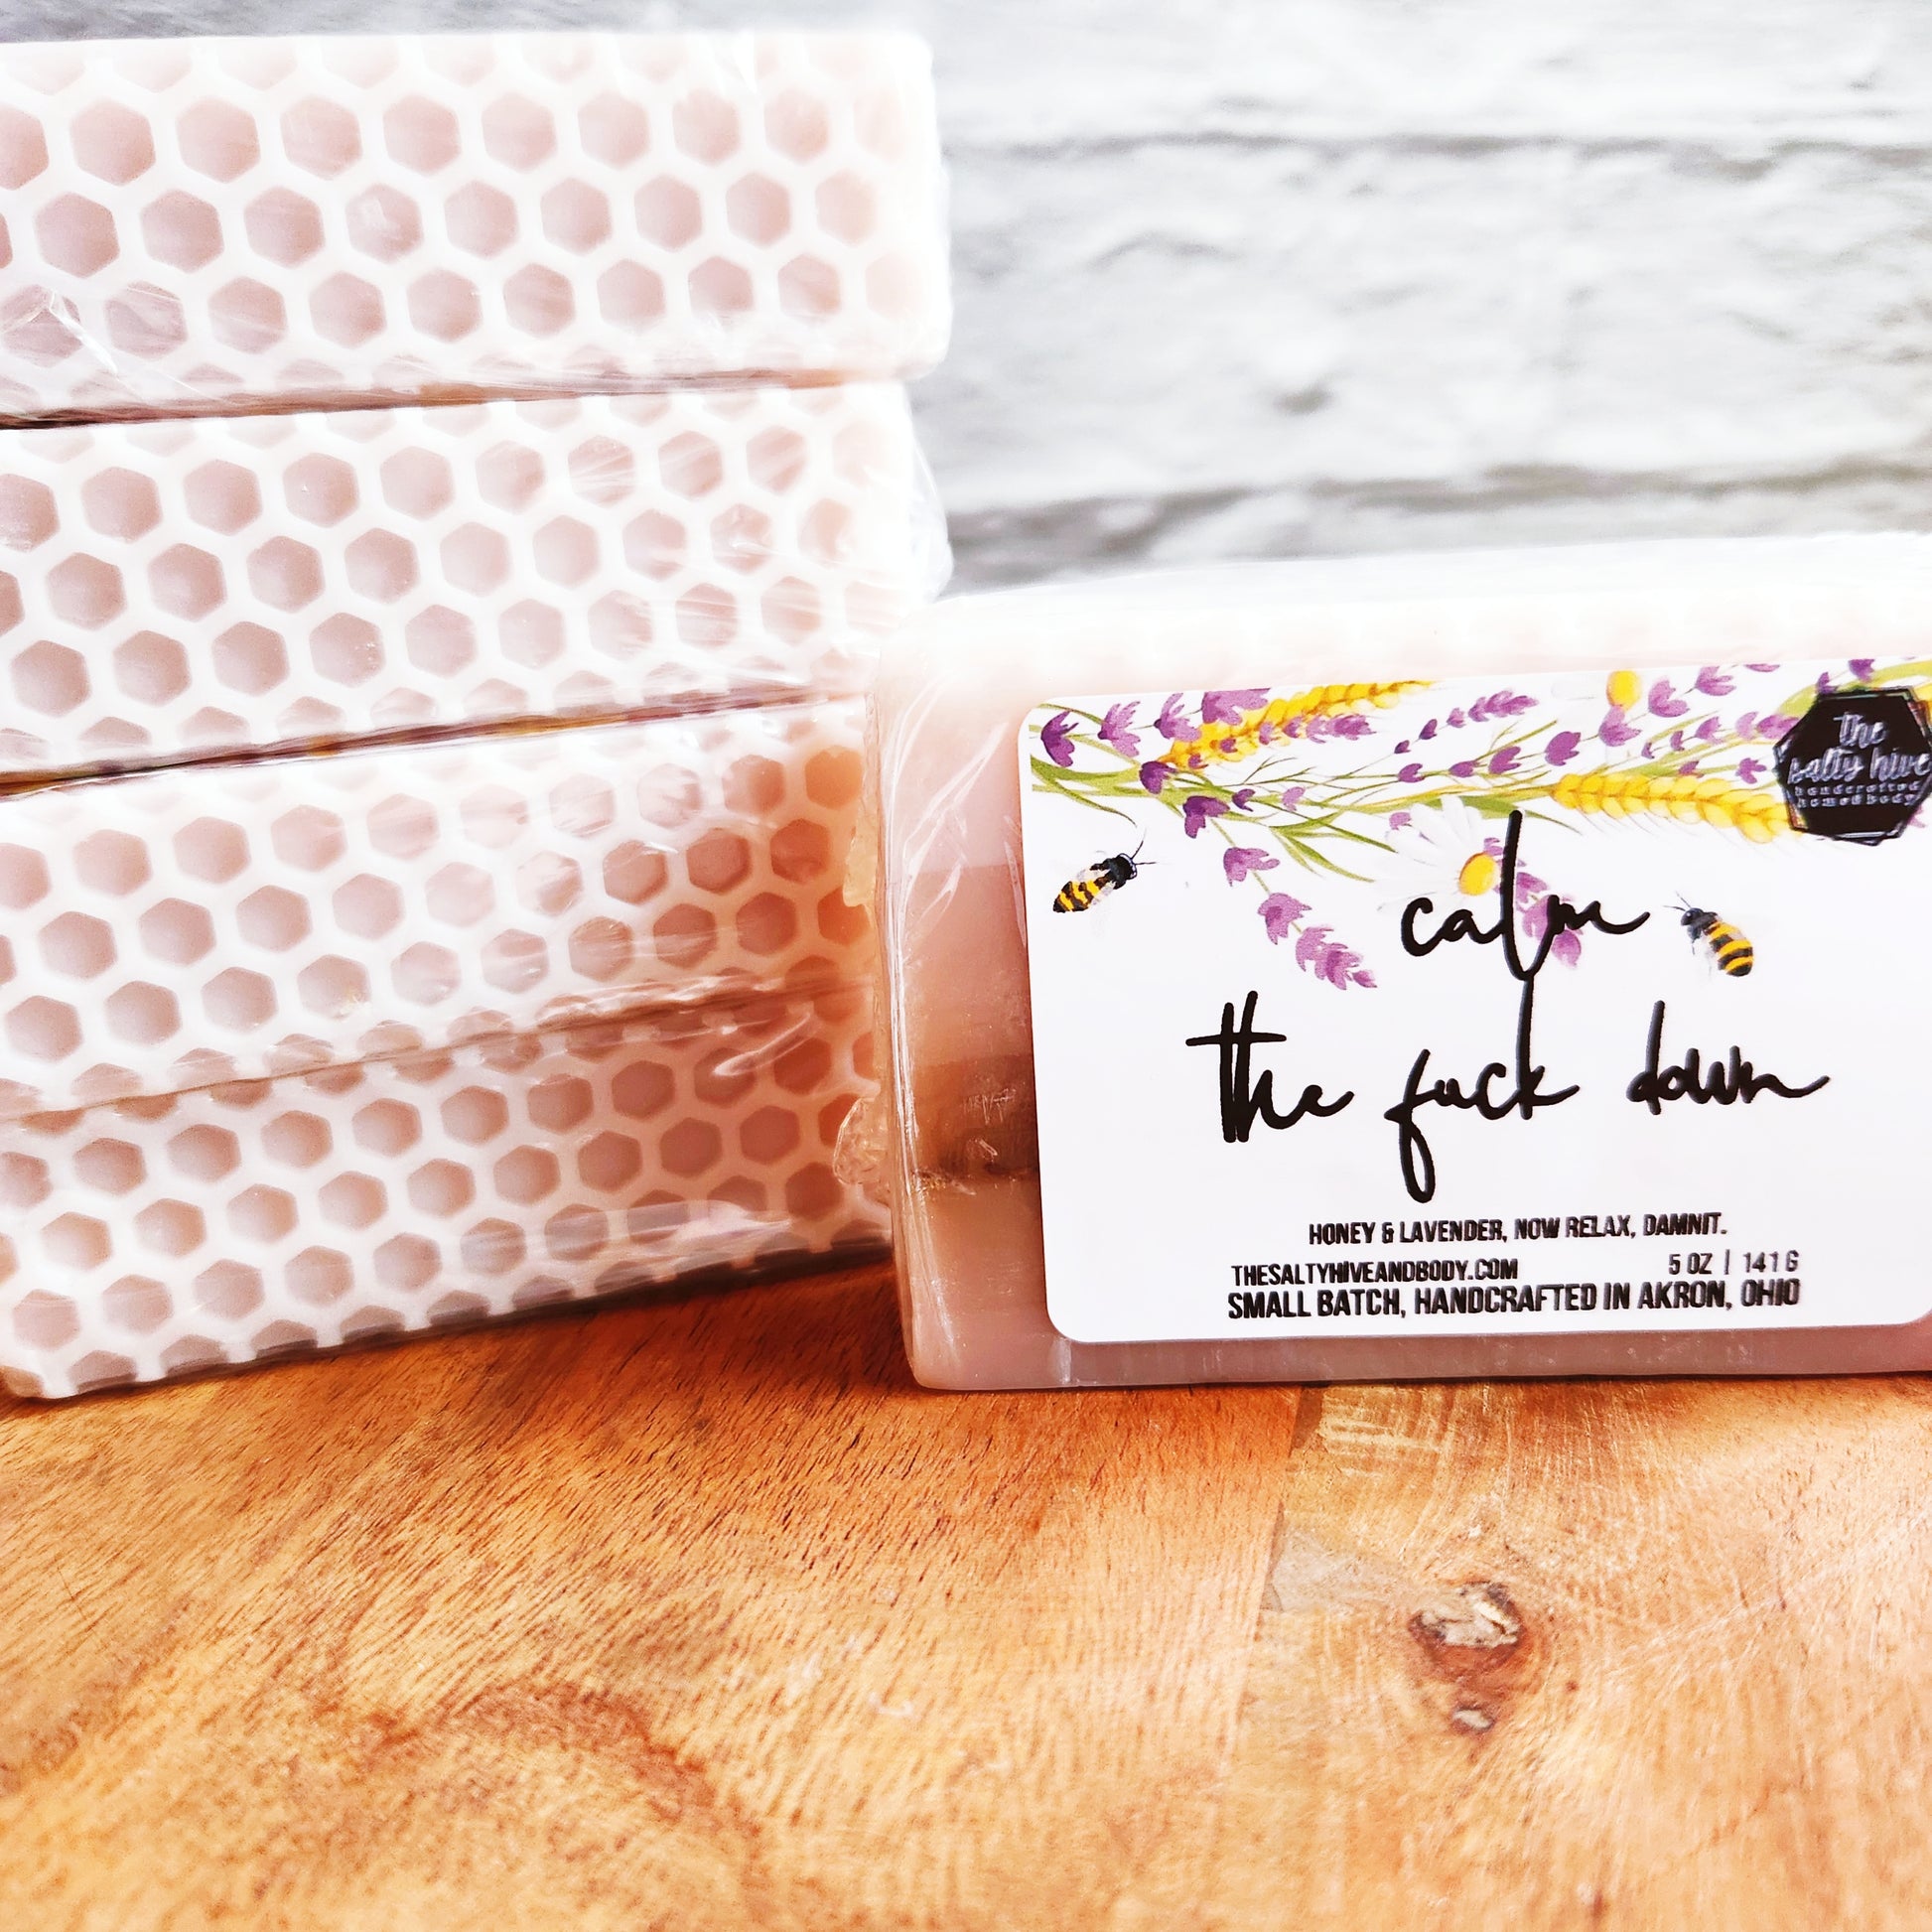 calm the fuck down - lavender & honey soap bar - the salty hive